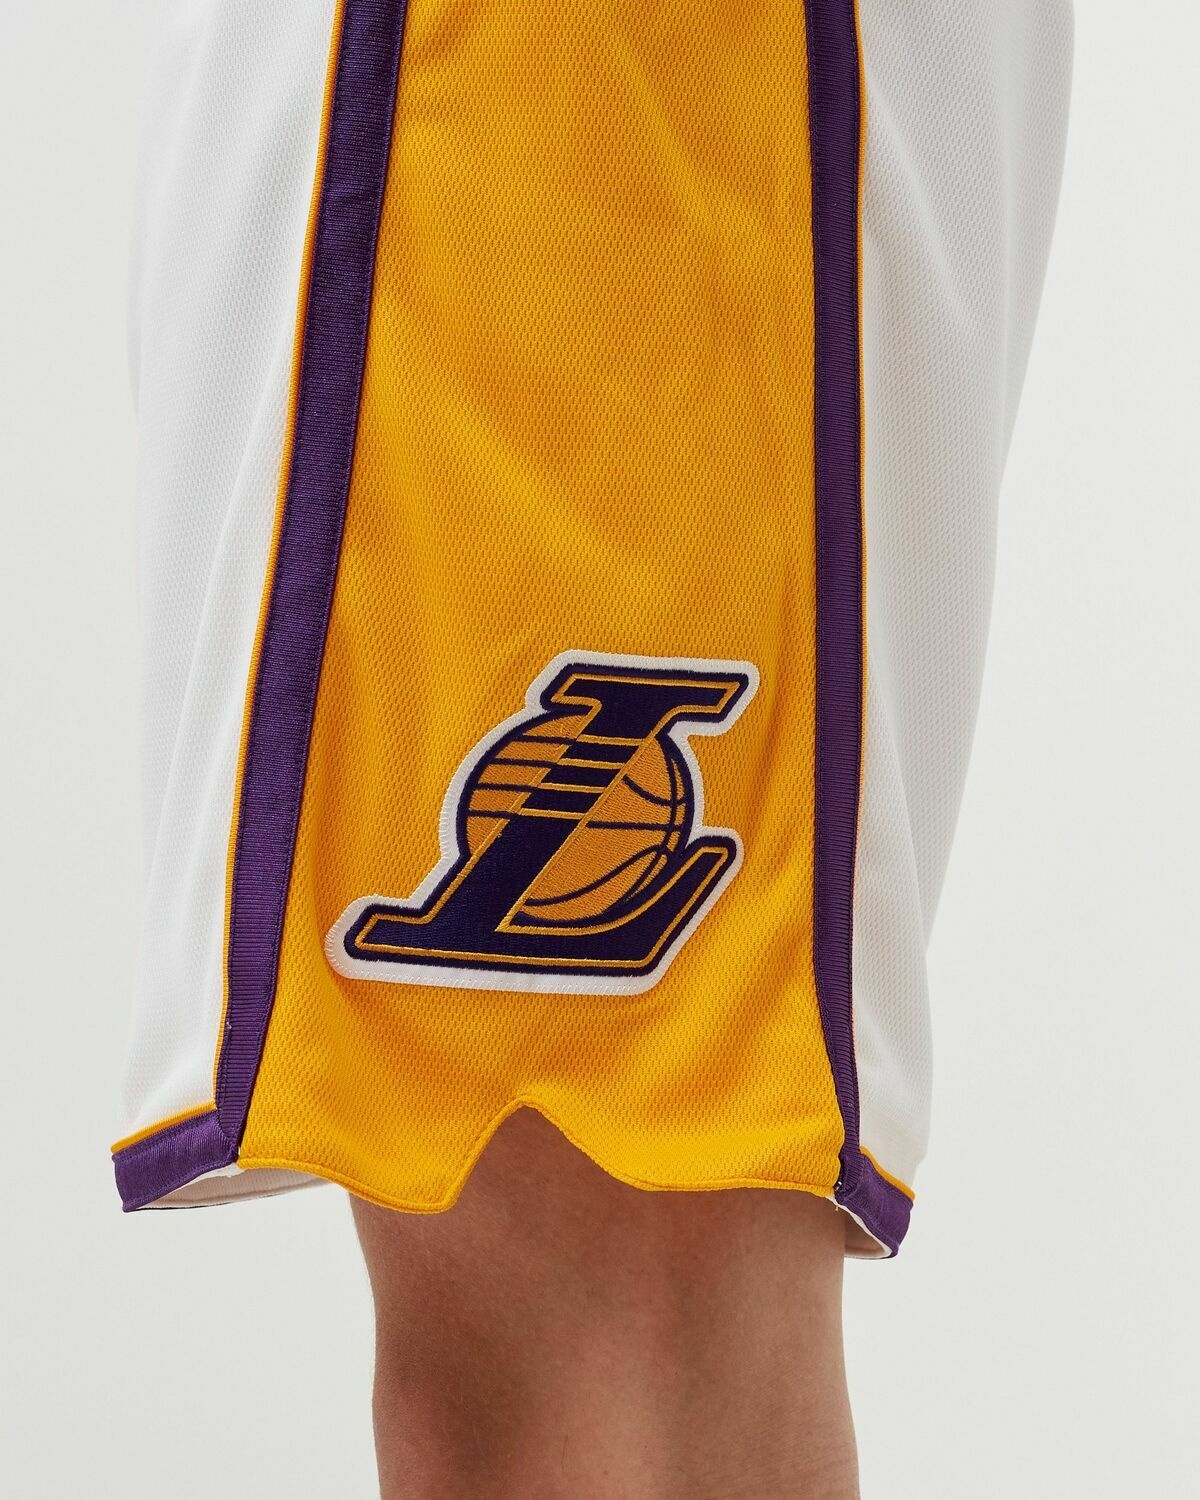 Mitchell & Ness Nba Authentic Shorts Los Angeles Lakers 2009 10 White - Mens - Sport & Team Shorts